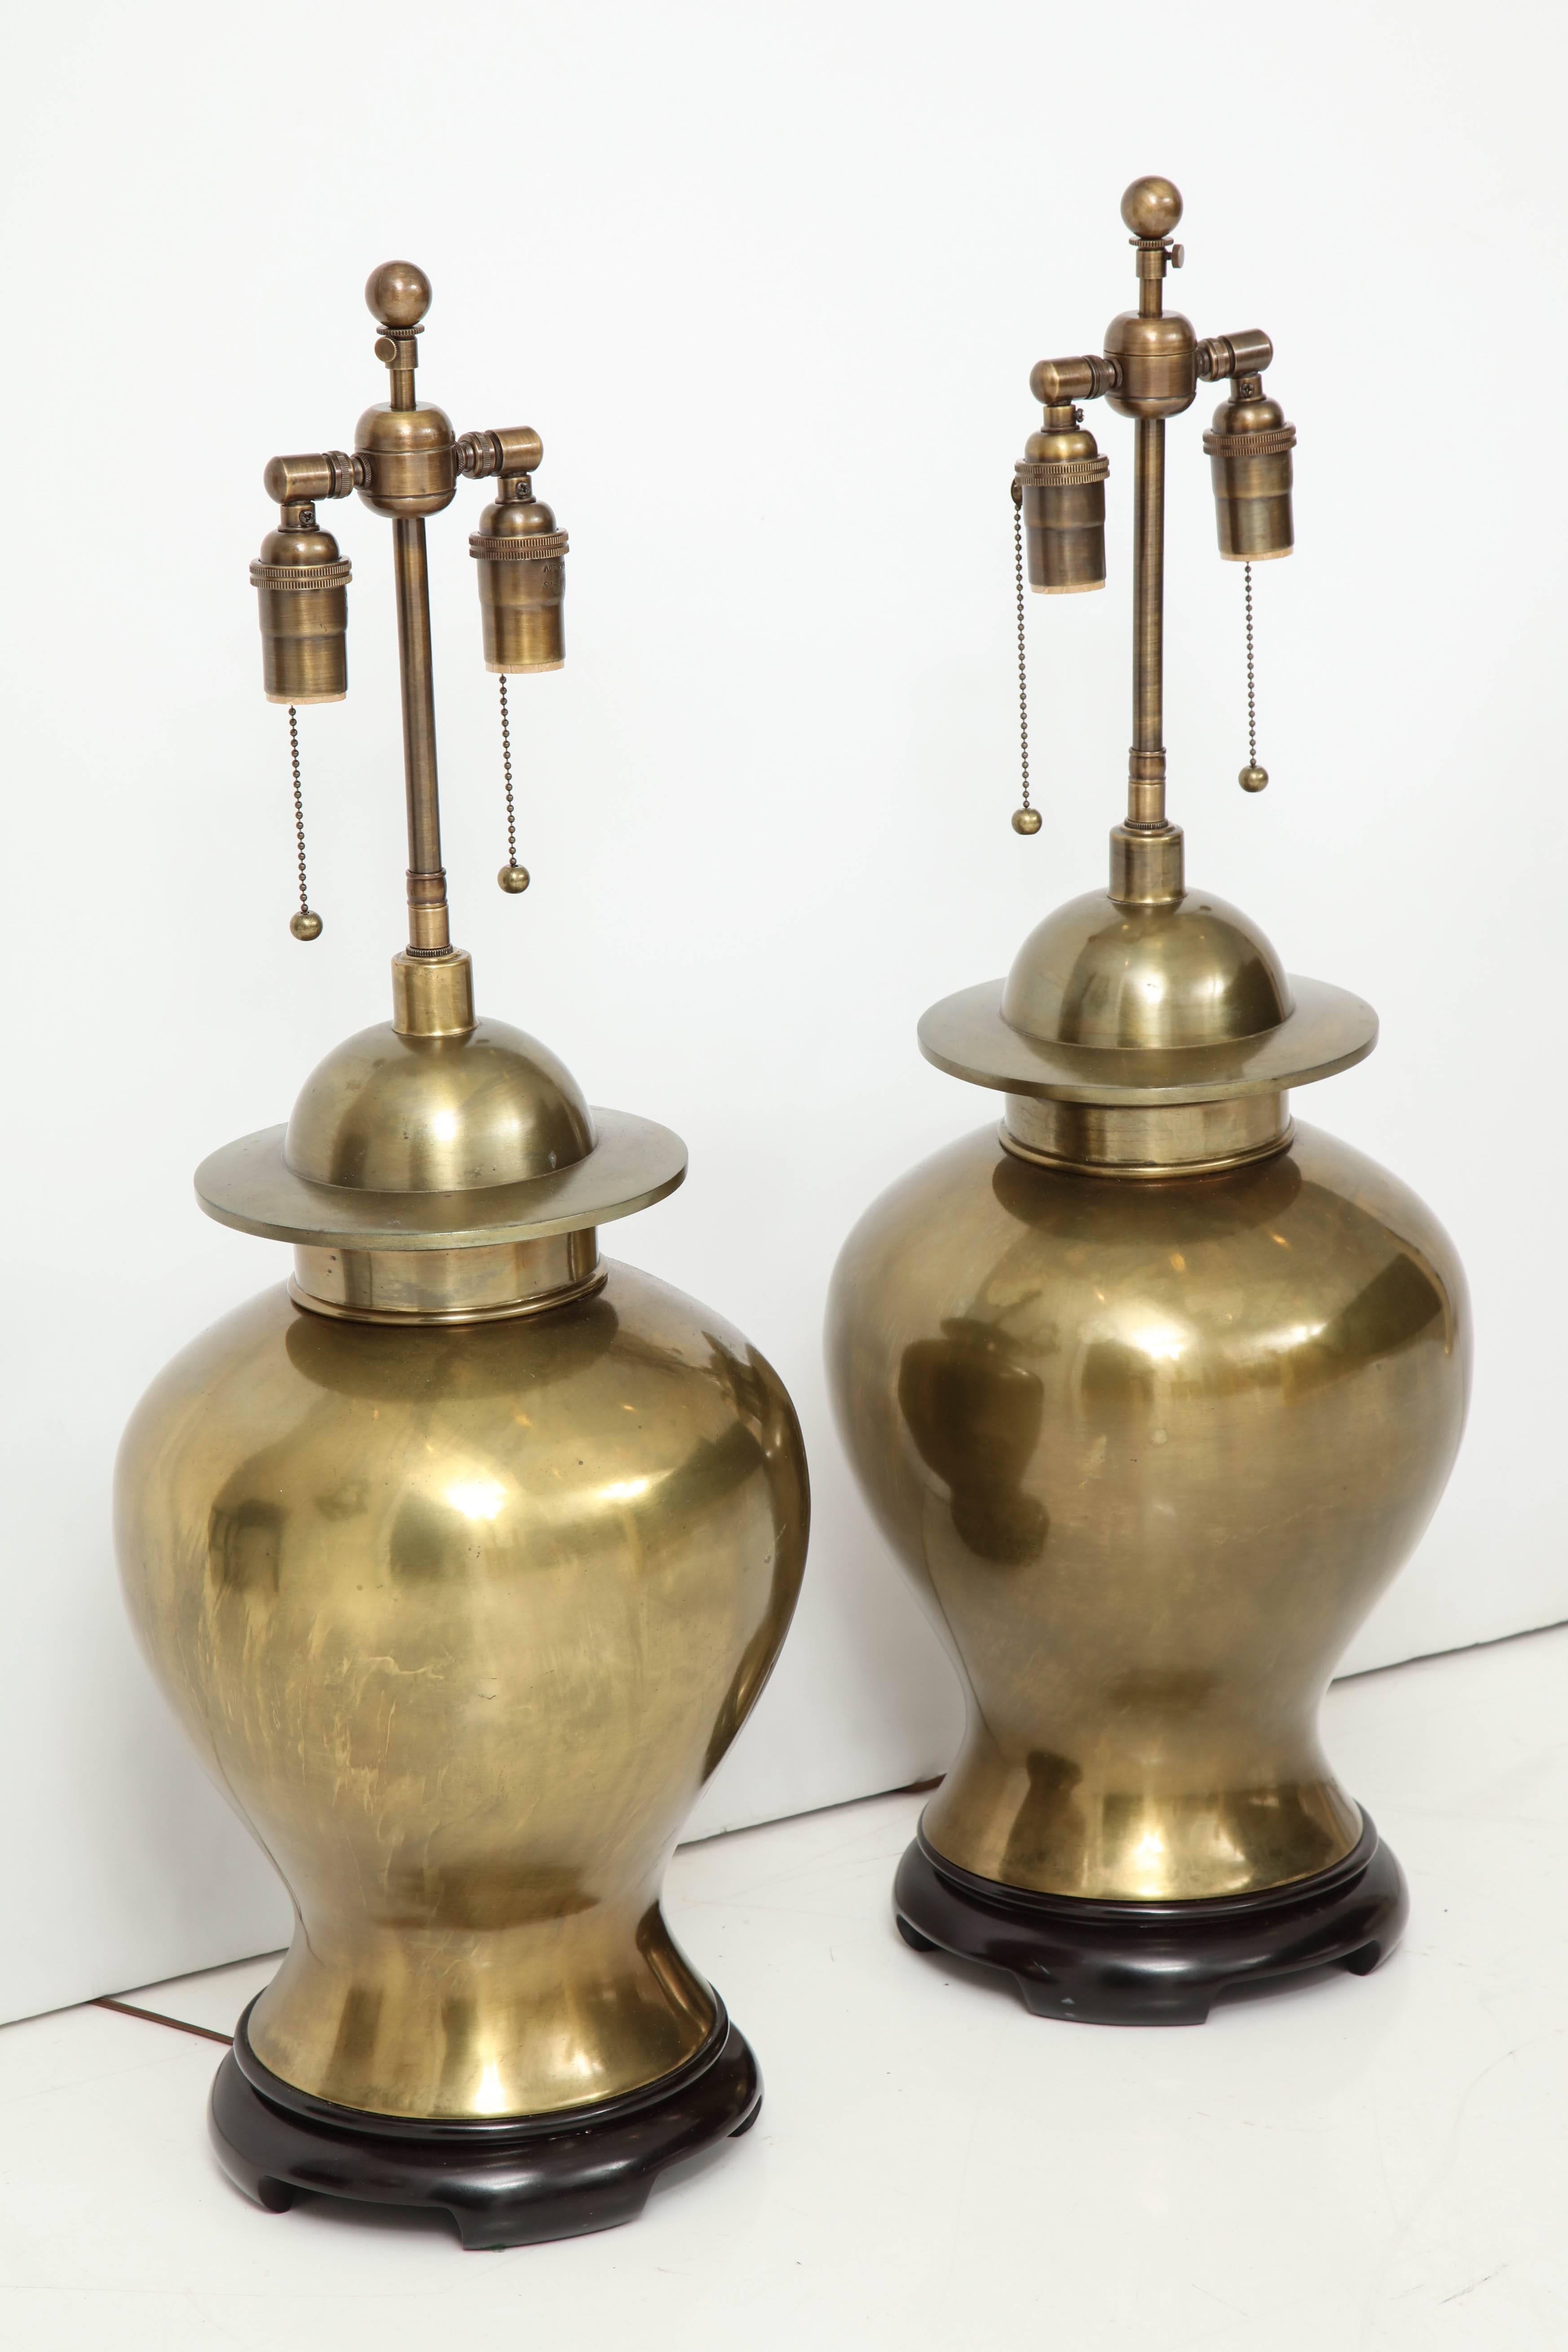 Wonderful pair of large brass ginger jar lamps with a beautiful patina.
The lamps have a significant weight to them and are newly rewired with polished antique brass double clusters that take standard light bulbs.
The overall height of the lamps